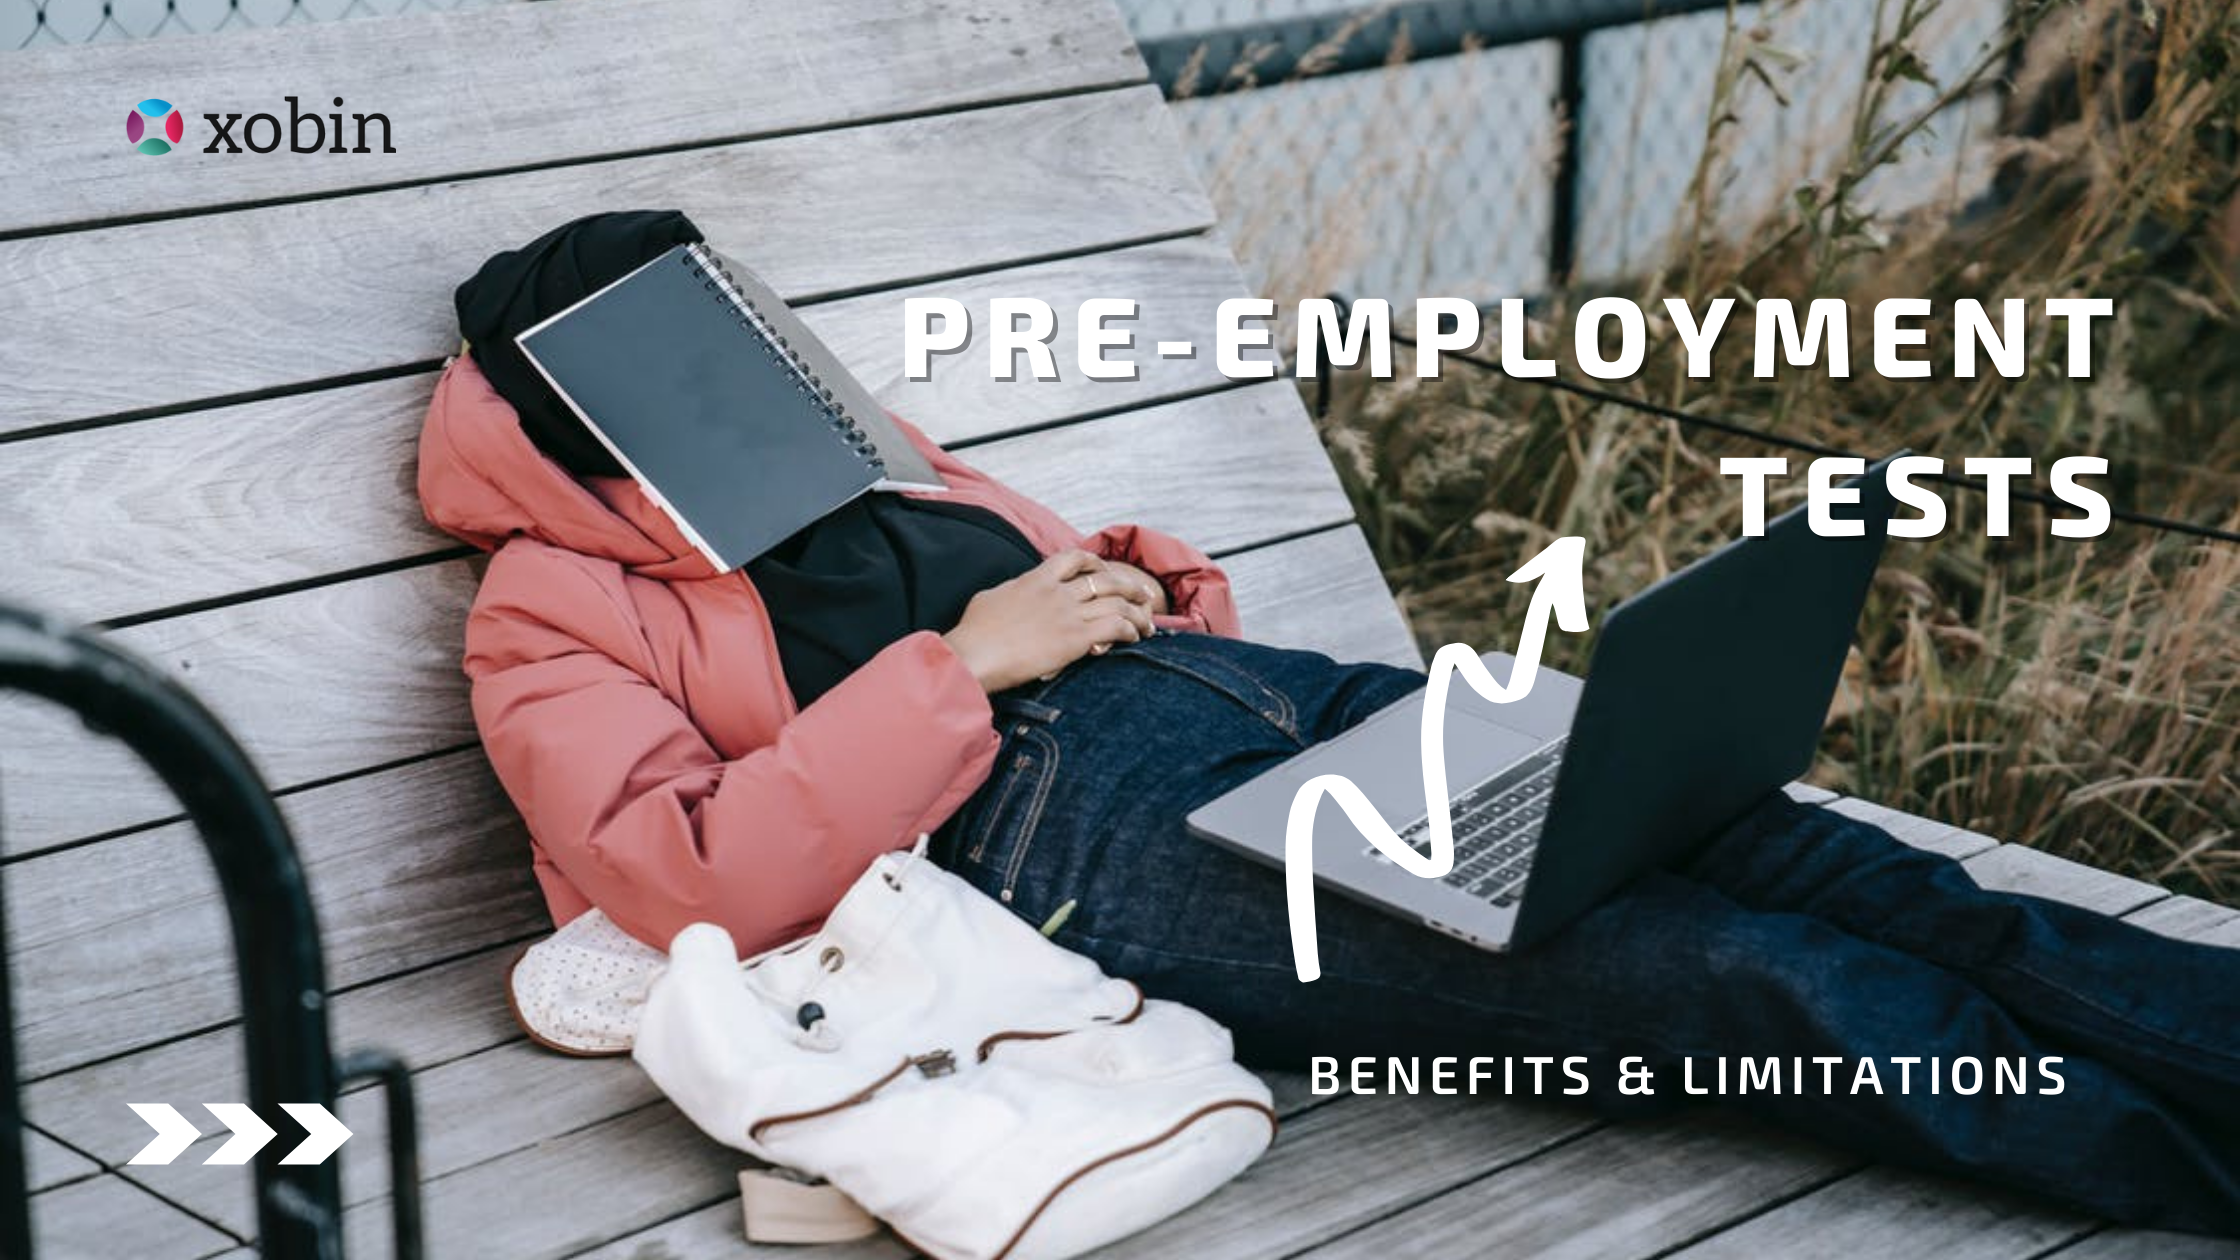 Benefits and Limitations of Pre-employment Tests